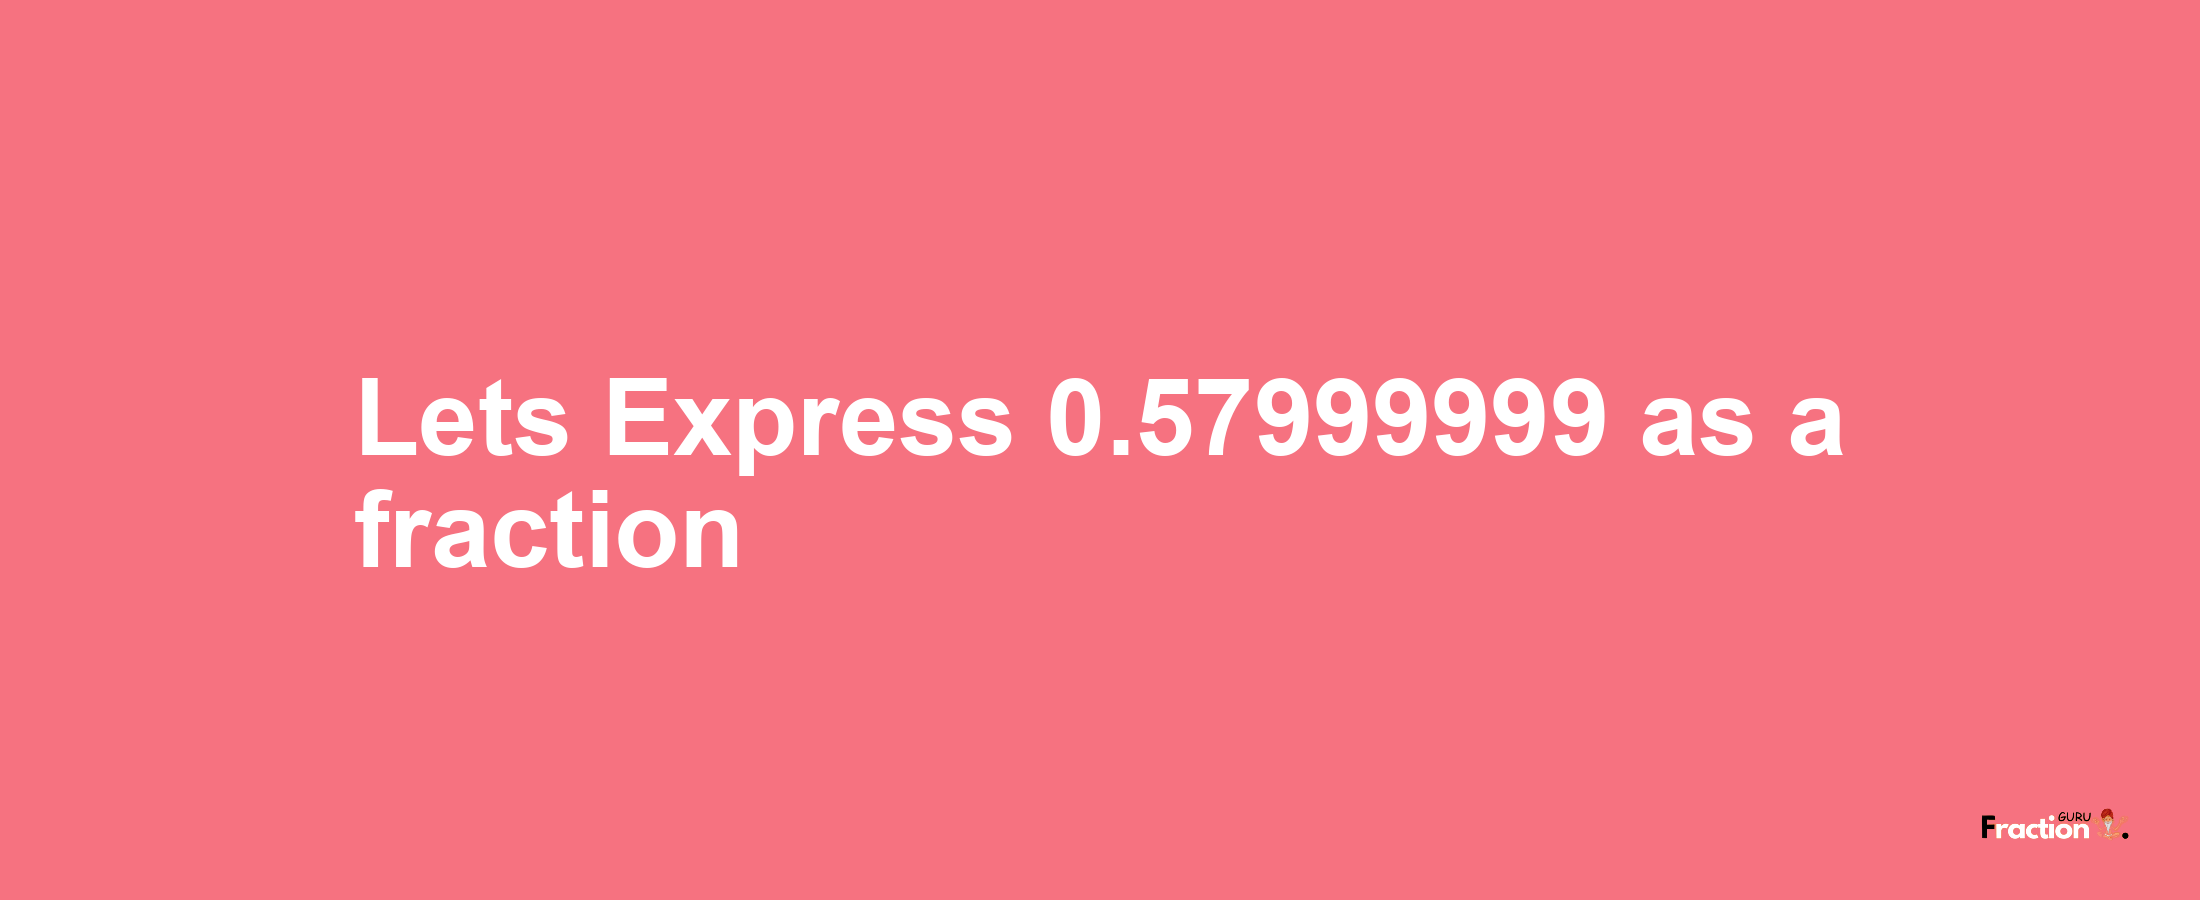 Lets Express 0.57999999 as afraction